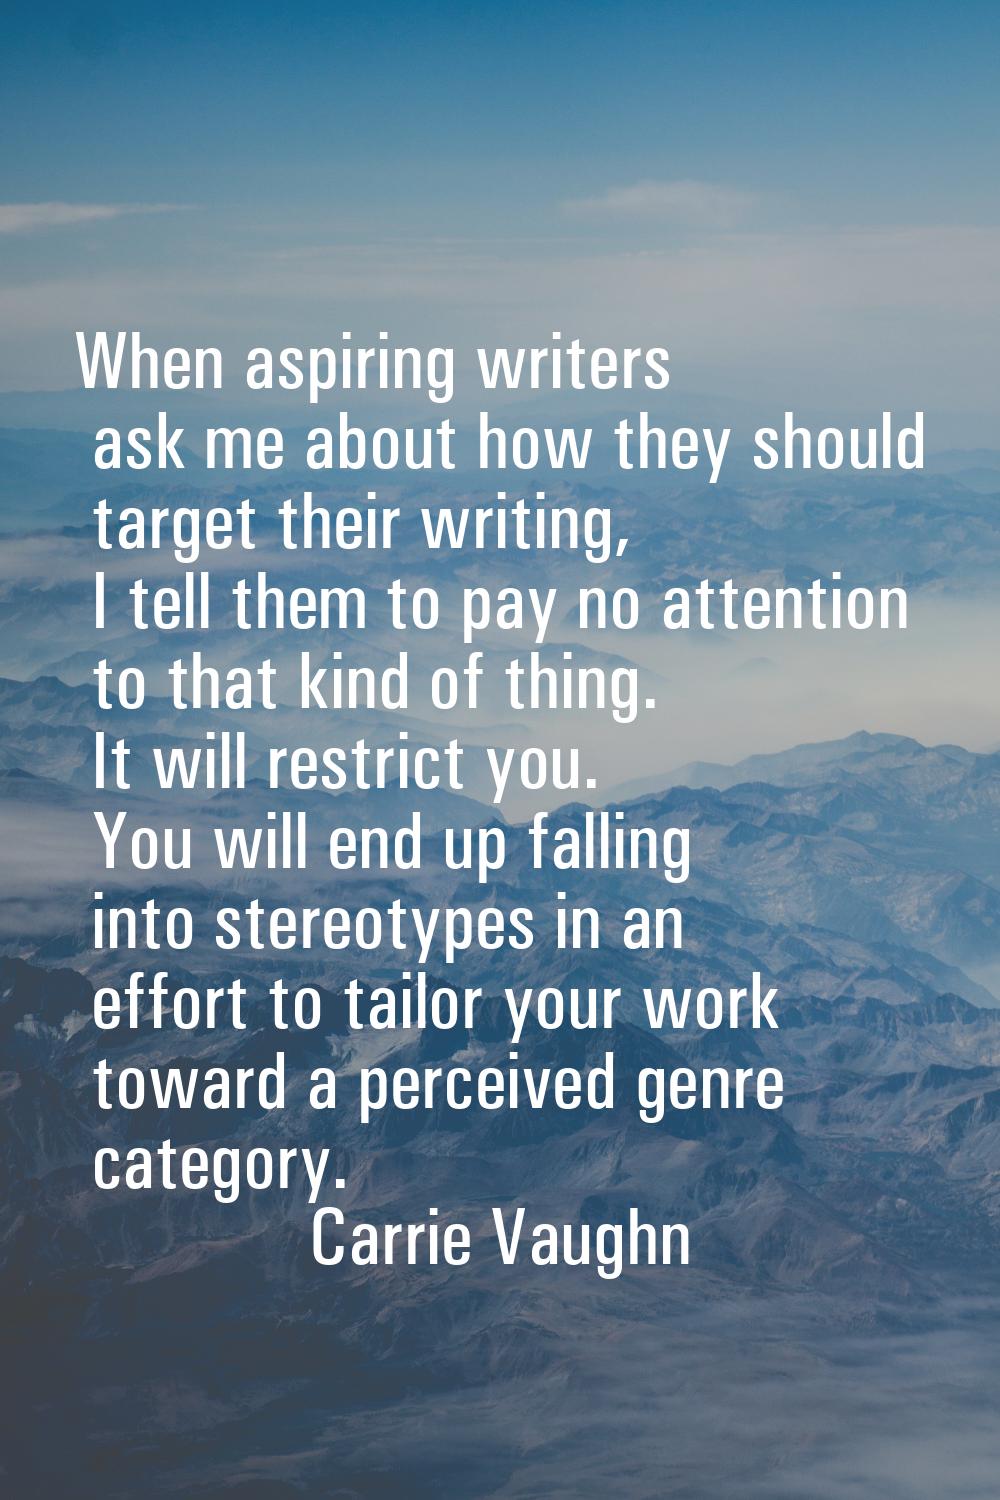 When aspiring writers ask me about how they should target their writing, I tell them to pay no atte